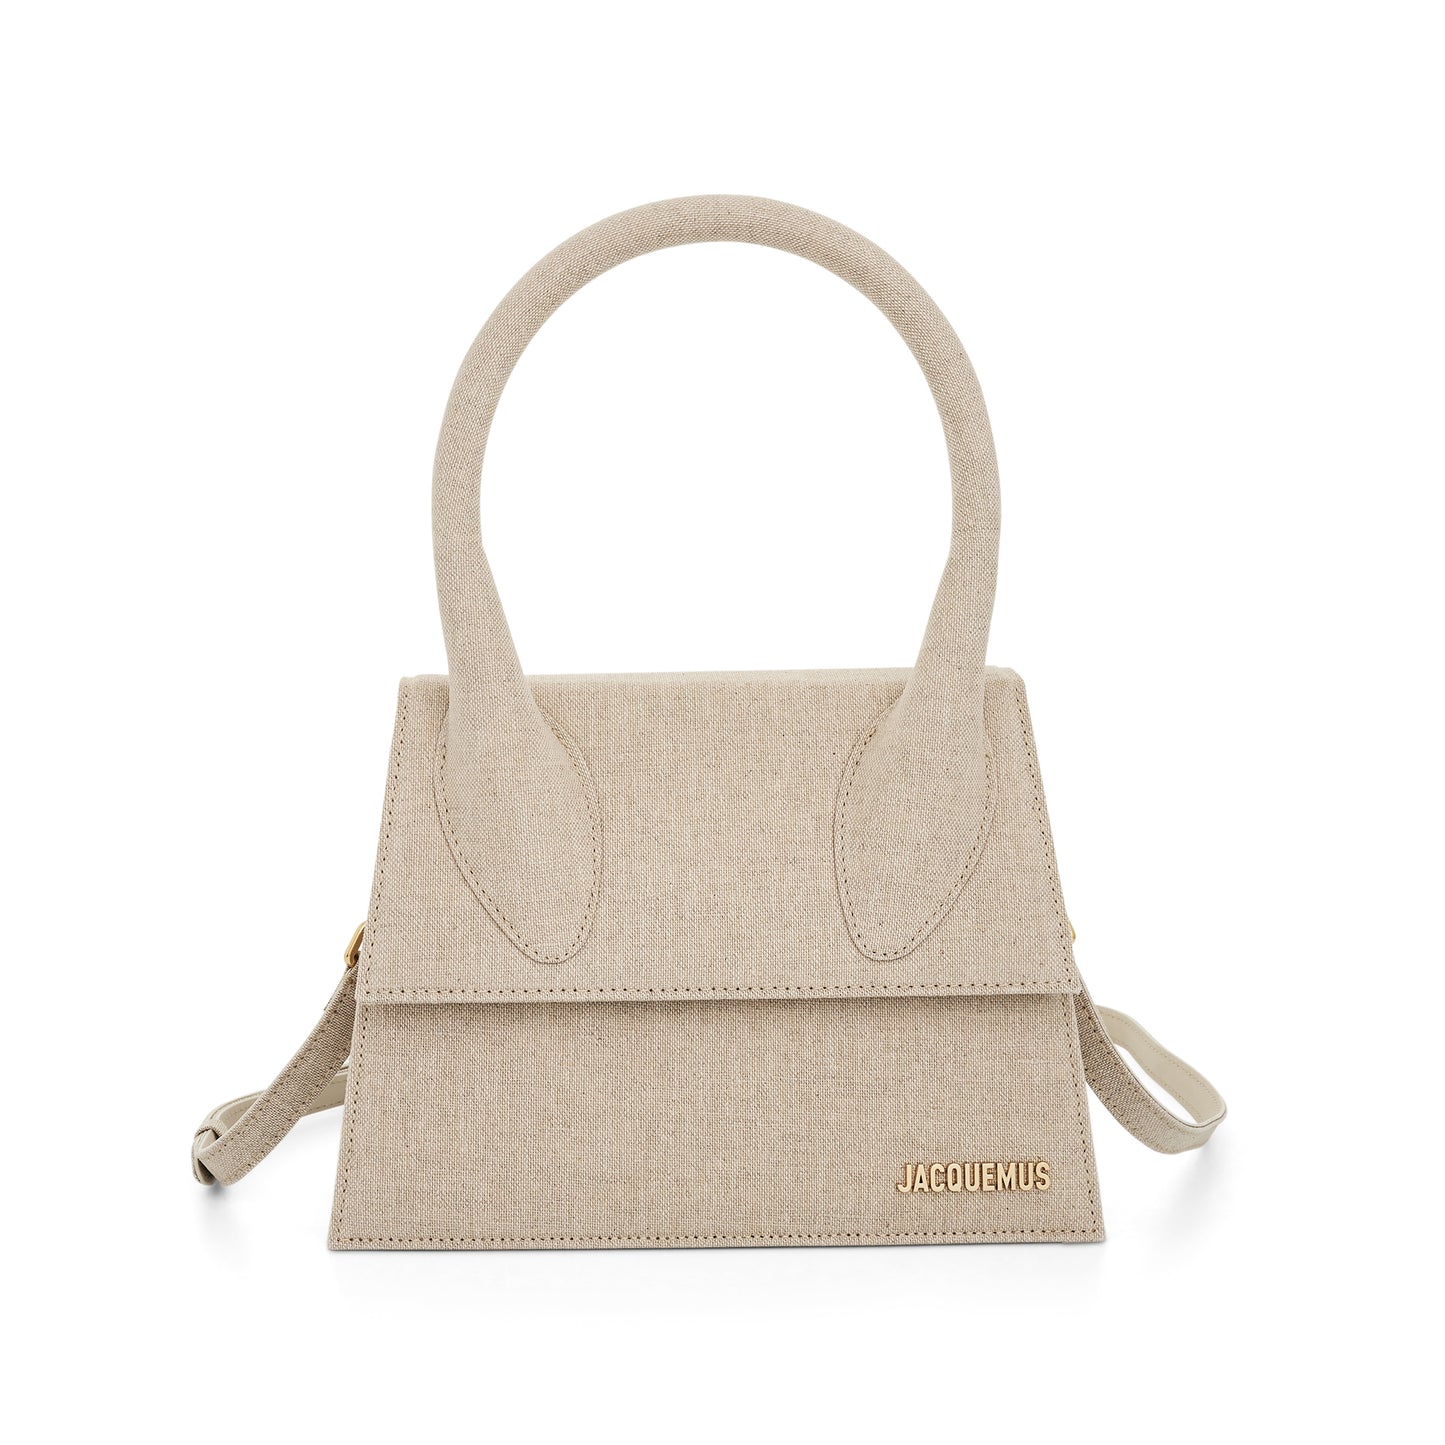 Le Grand Chiquito Leather Bag in Light Greige